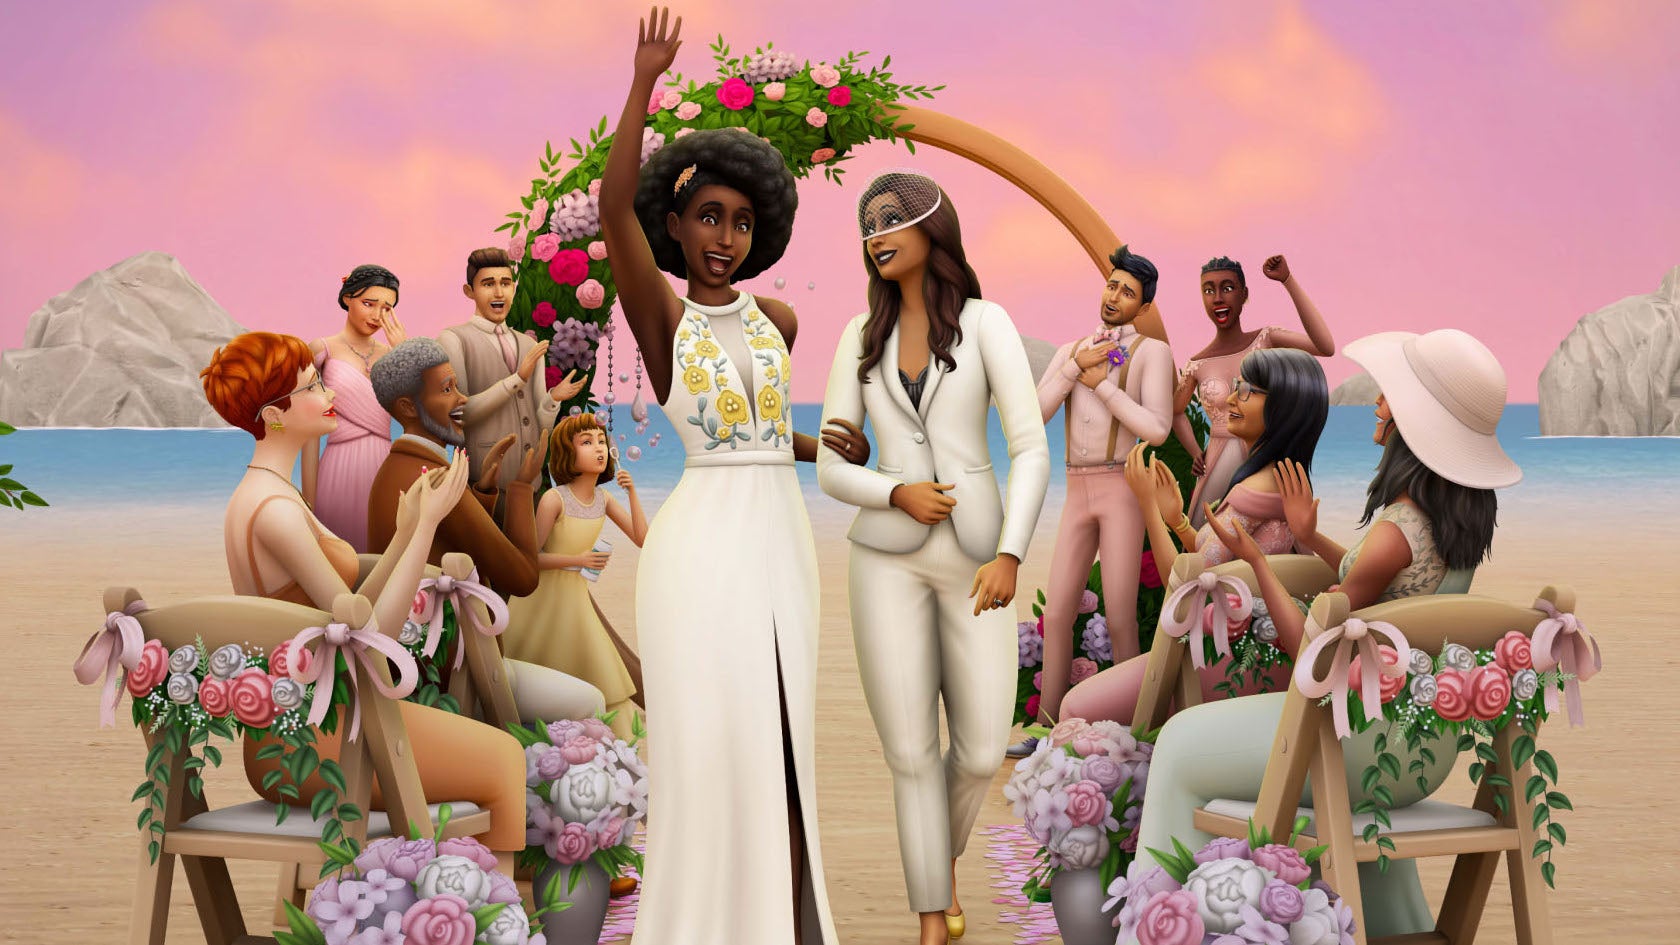 EA will release The Sims 4's wedding expansion in Russia with disastrous sapphic romcom relationship intact thumbnail